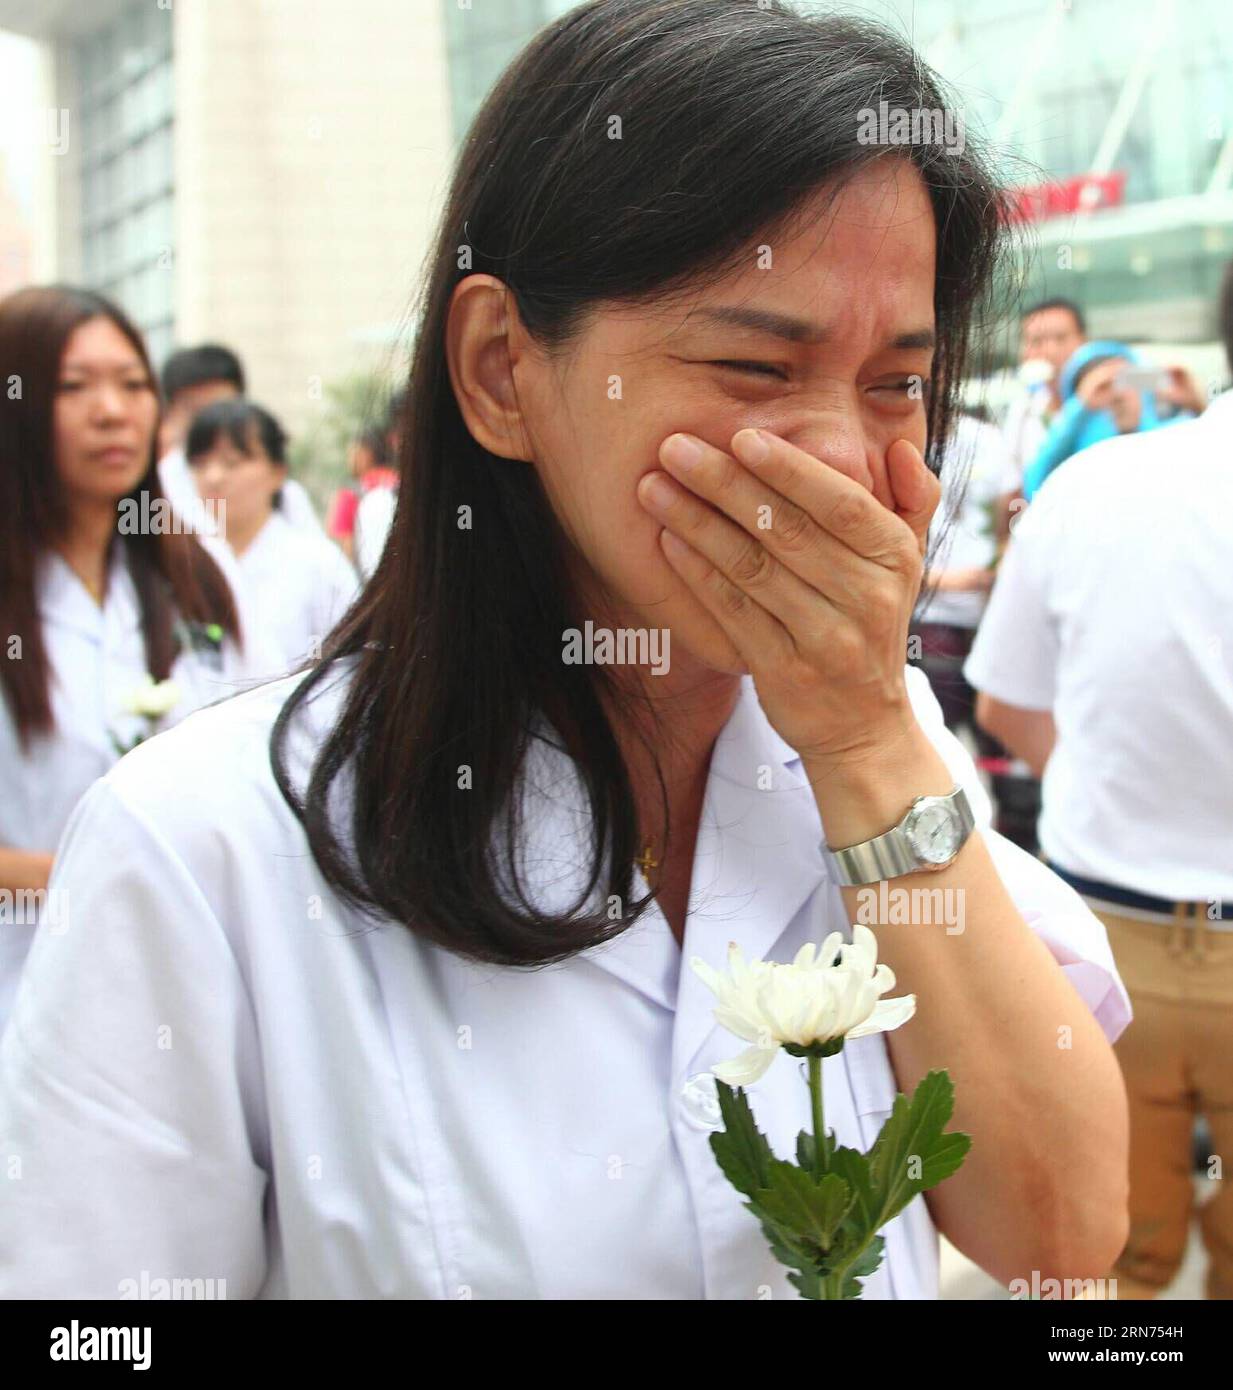 (150818) -- TIANJIN, Aug. 18, 2015 -- A medical staff member cries while mourning for the victims of the massive warehouse explosions at Taida Hospital near the explosion site in Tianjin, north China, Aug. 18, 2015. The death toll from last week s massive blasts in Tianjin rose to 114. ) (wyo) CHINA-TIANJIN-EXPLOSION-MOURNING (CN) ChenxYichen PUBLICATIONxNOTxINxCHN   150818 Tianjin Aug 18 2015 a Medical Staff member cries while Mourning for The Victims of The Massive Warehouse Explosions AT Taida Hospital Near The Explosion Site in Tianjin North China Aug 18 2015 The Death toll from Load Week Stock Photo